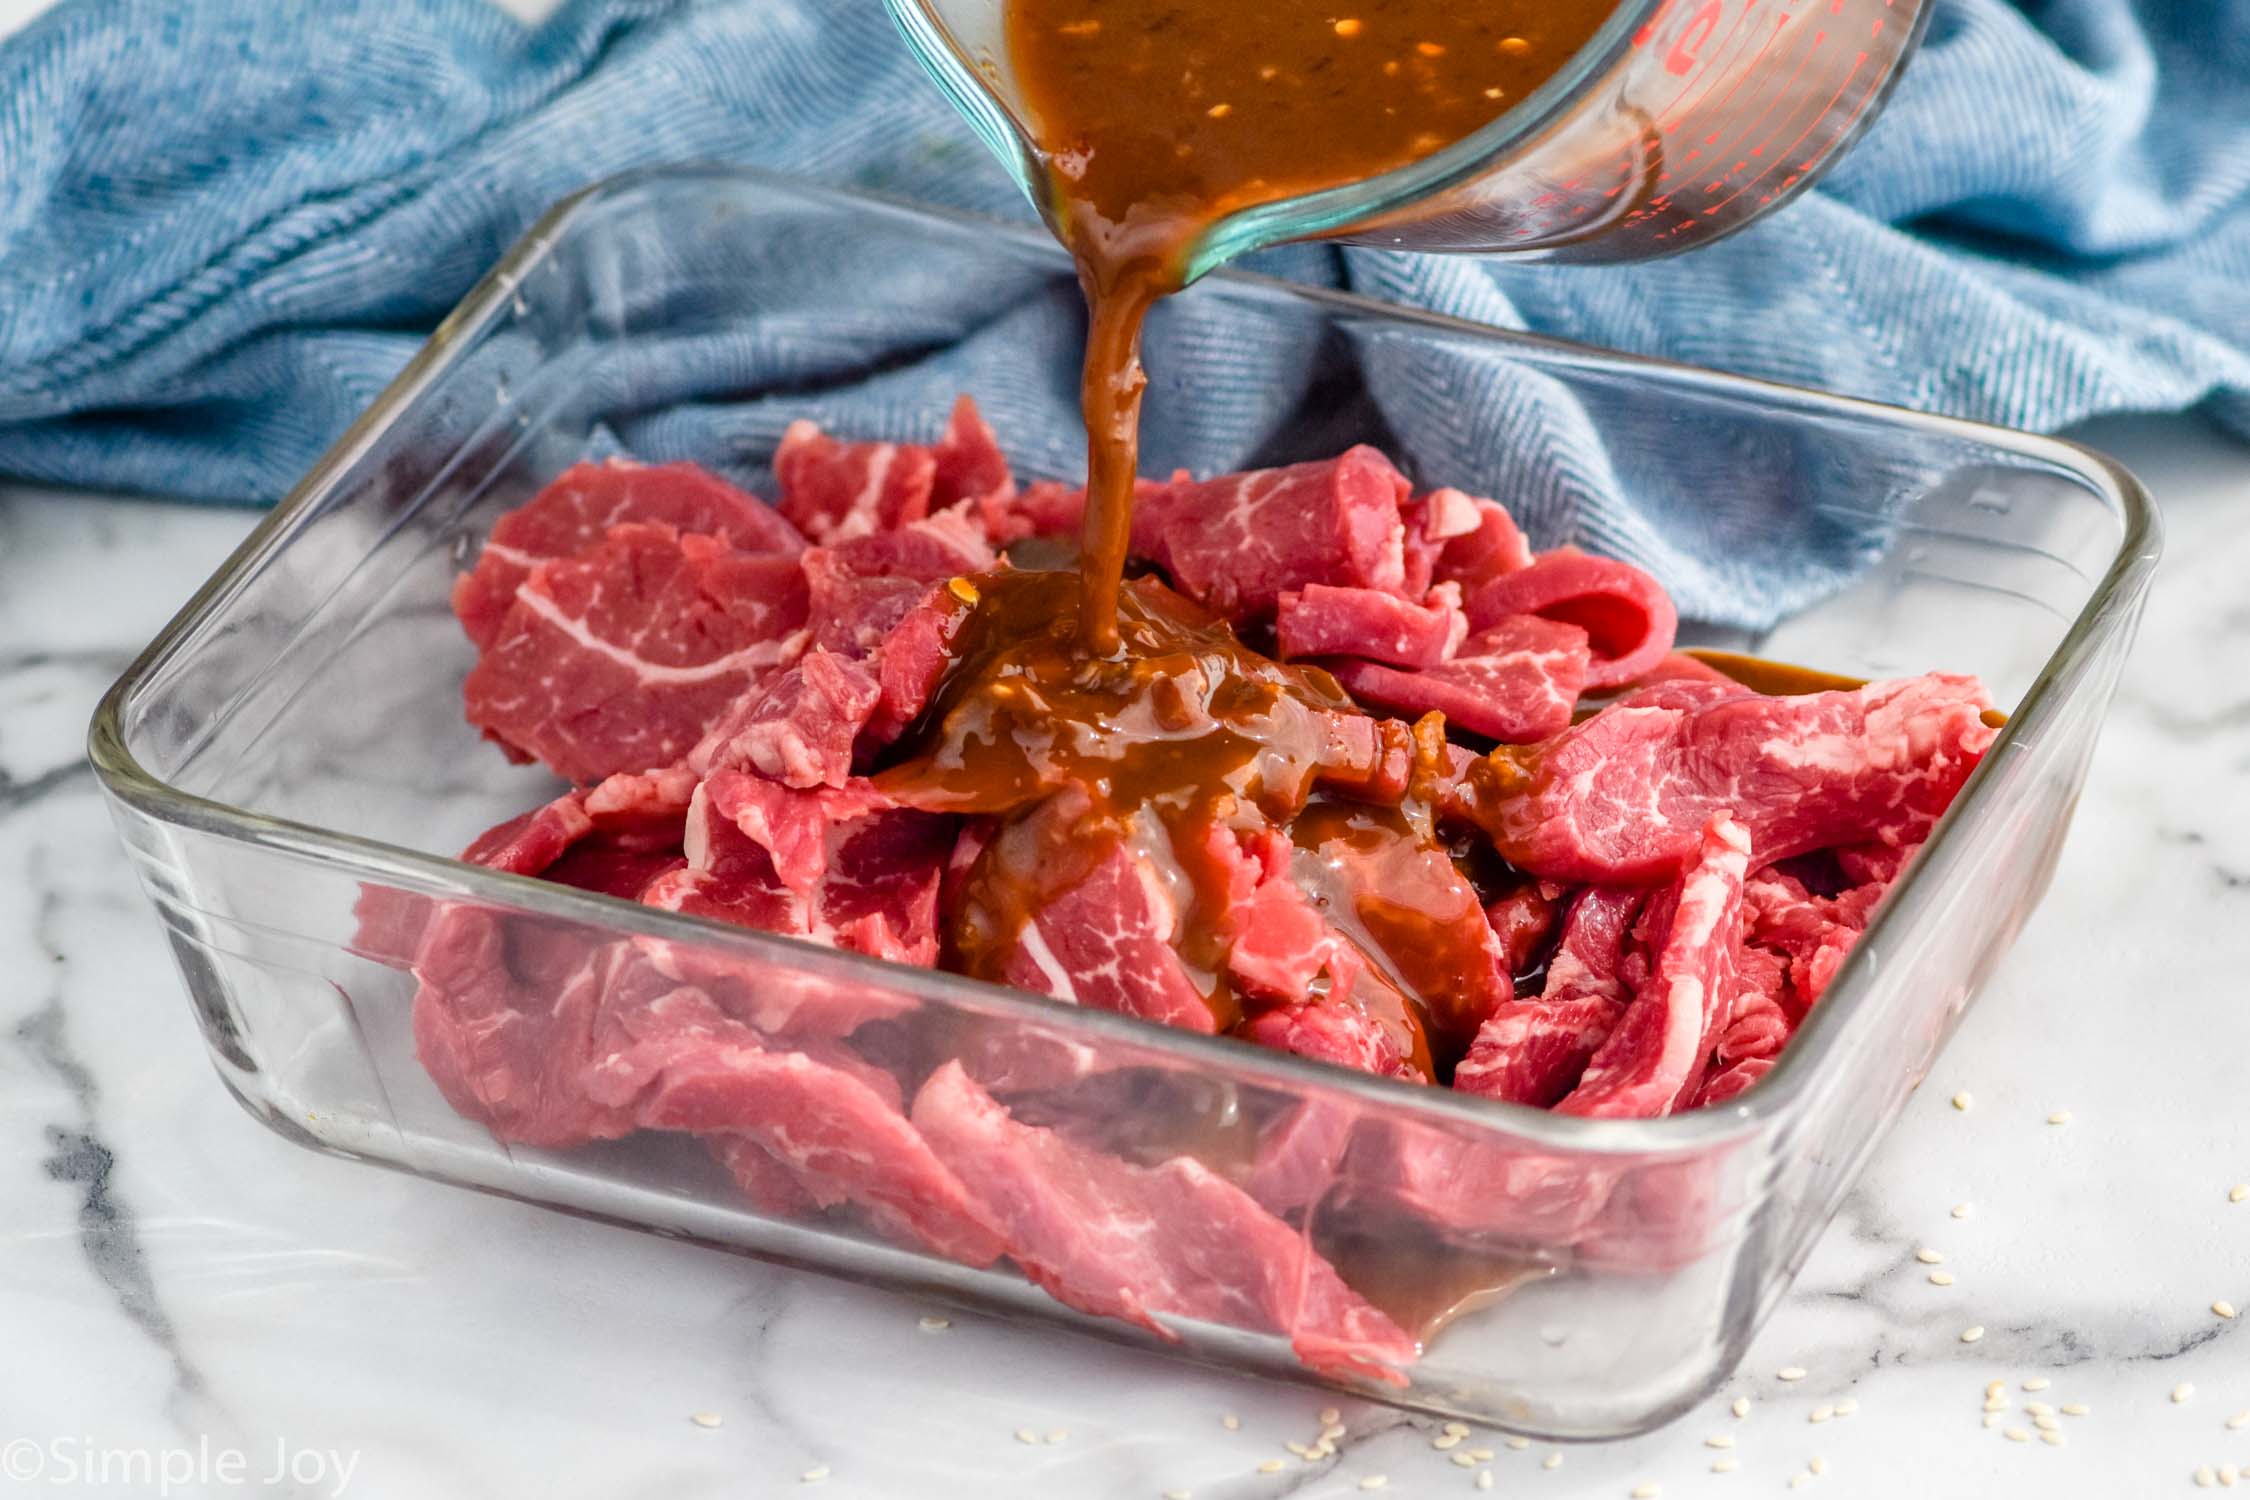 glass measuring cup pouring beef stir fry marinade into a pan of sliced beef to make beef stir fry